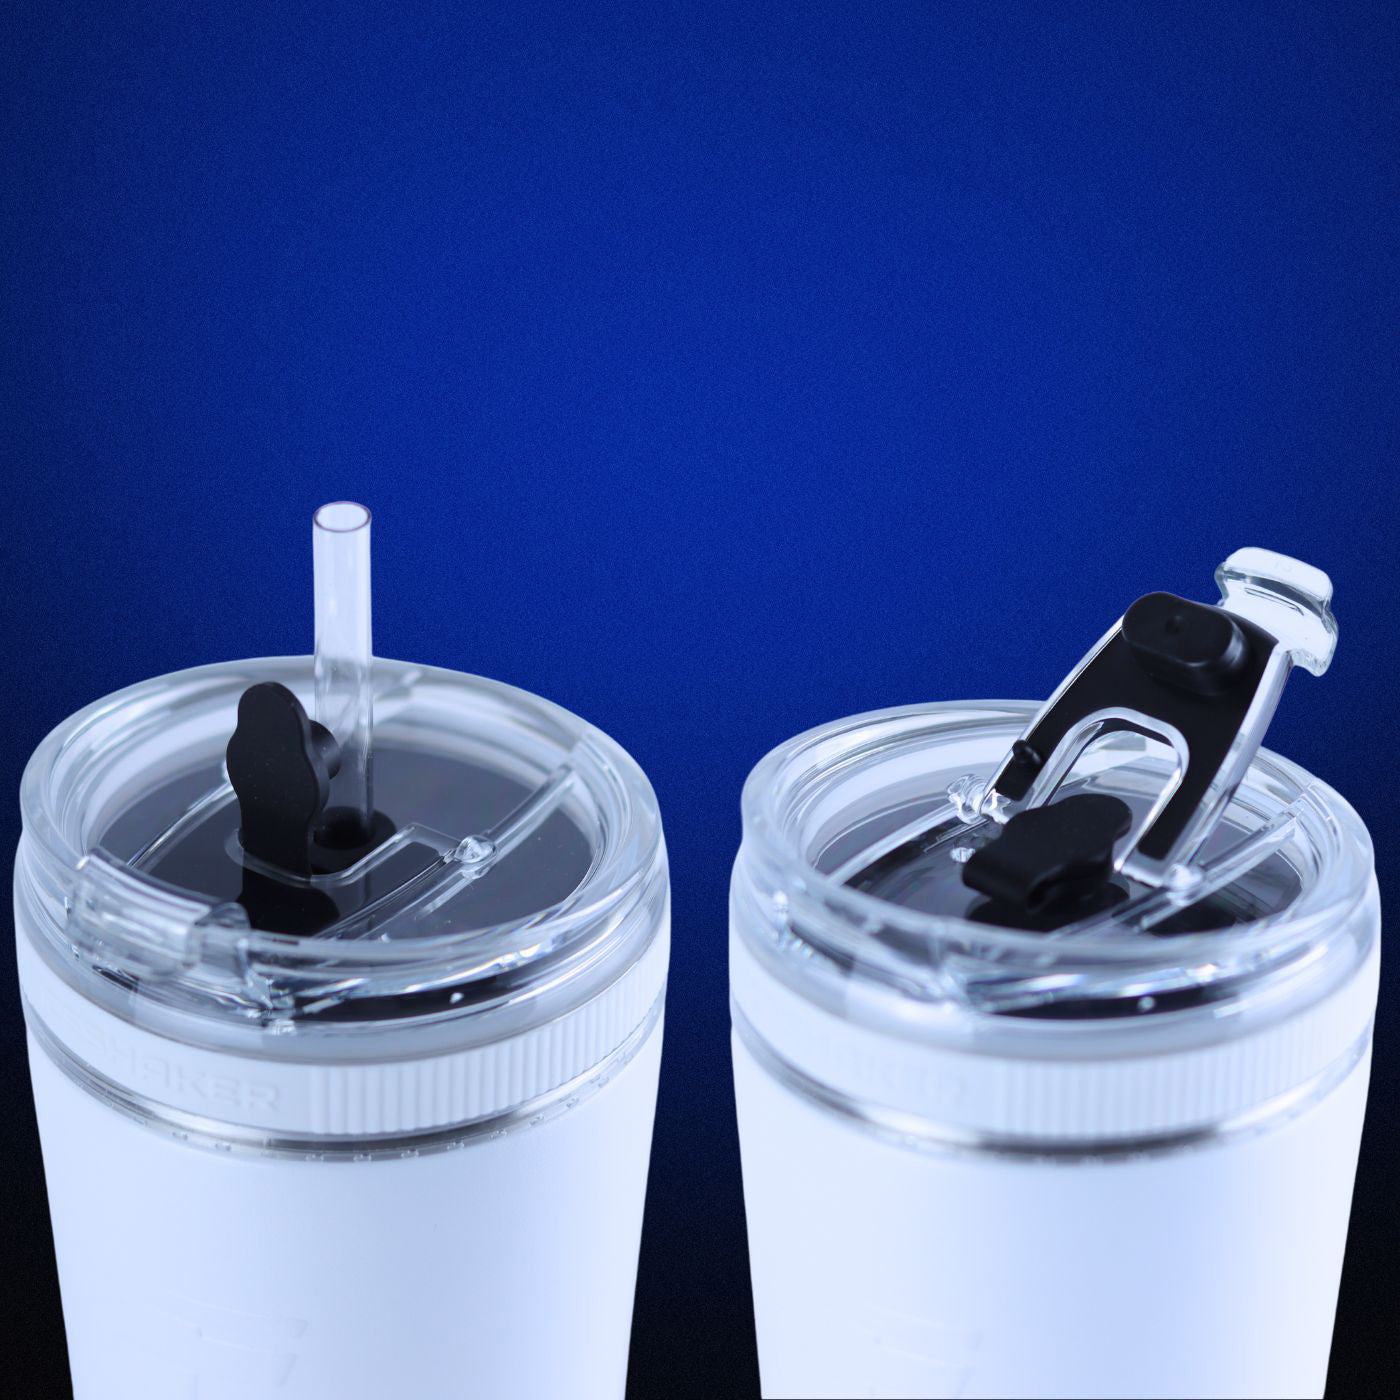 This image shows the 2 different ways you're about to use the Versatile Flex Lid. The first way shows with the straw inserted. The second way shows with the straw removed, the straw hole plugged, and the drink flap open.